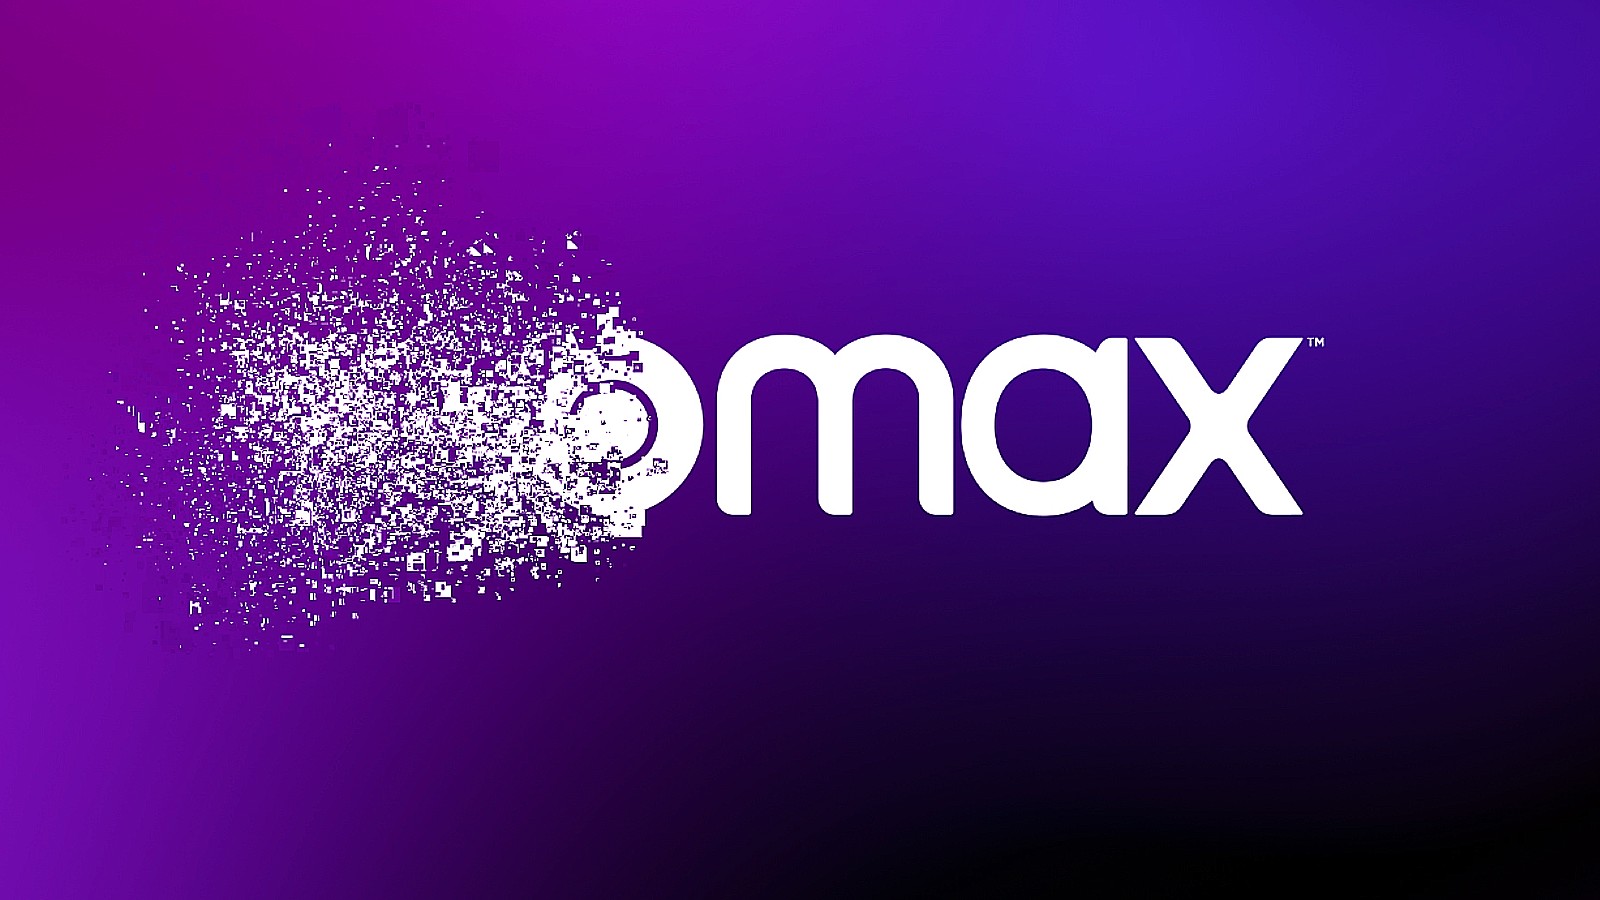 HBO Max is now Max